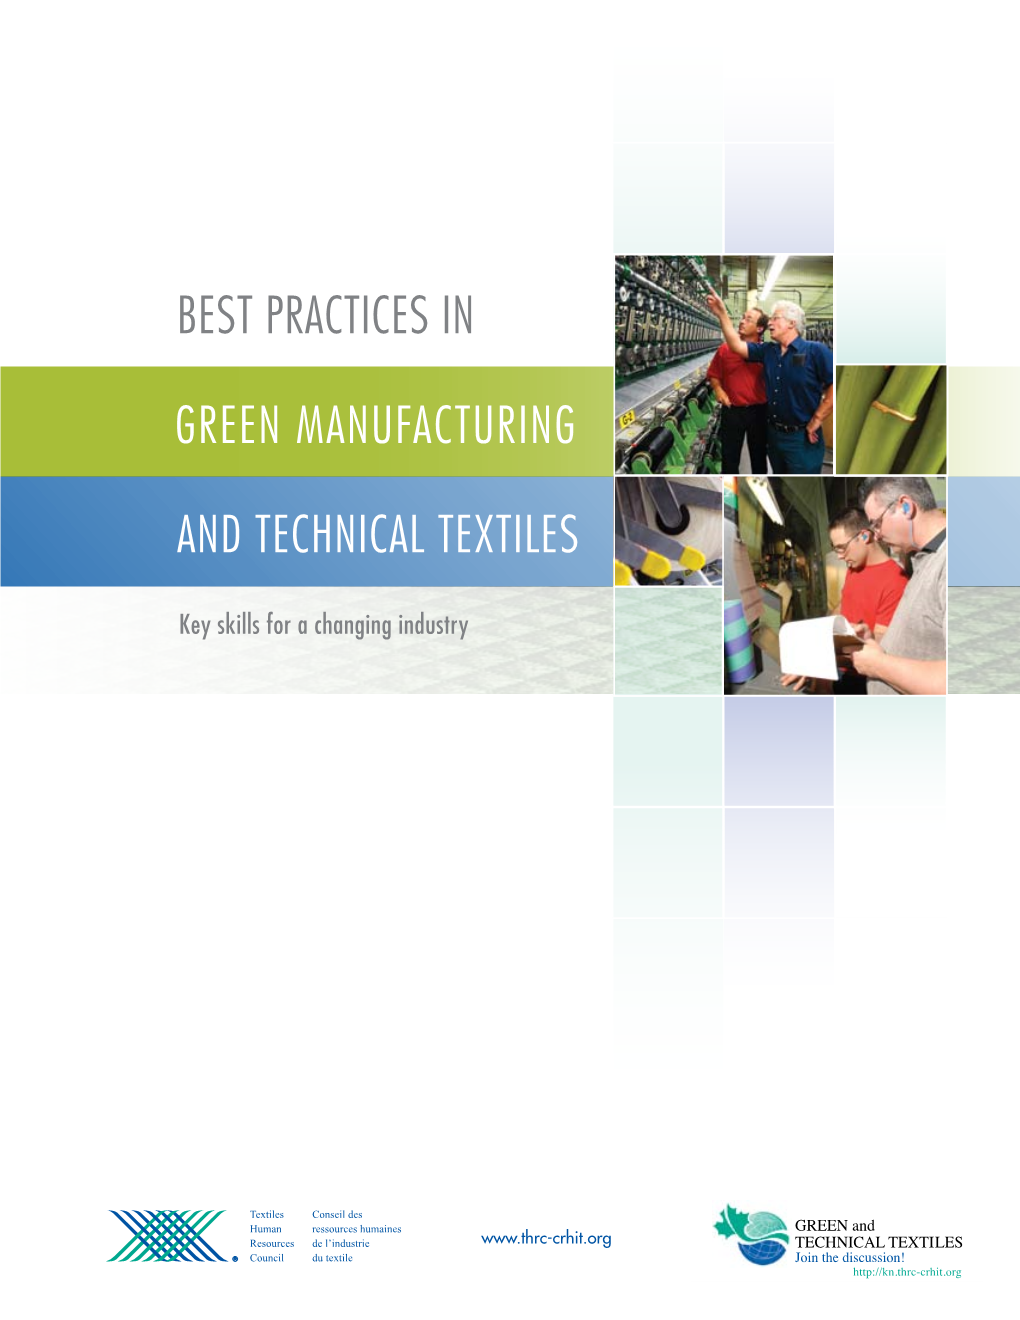 Best Practices in Green Manufacturing and Technical Textiles I Beste Xpracticesecutive S Uinmm Technicalary Textiles